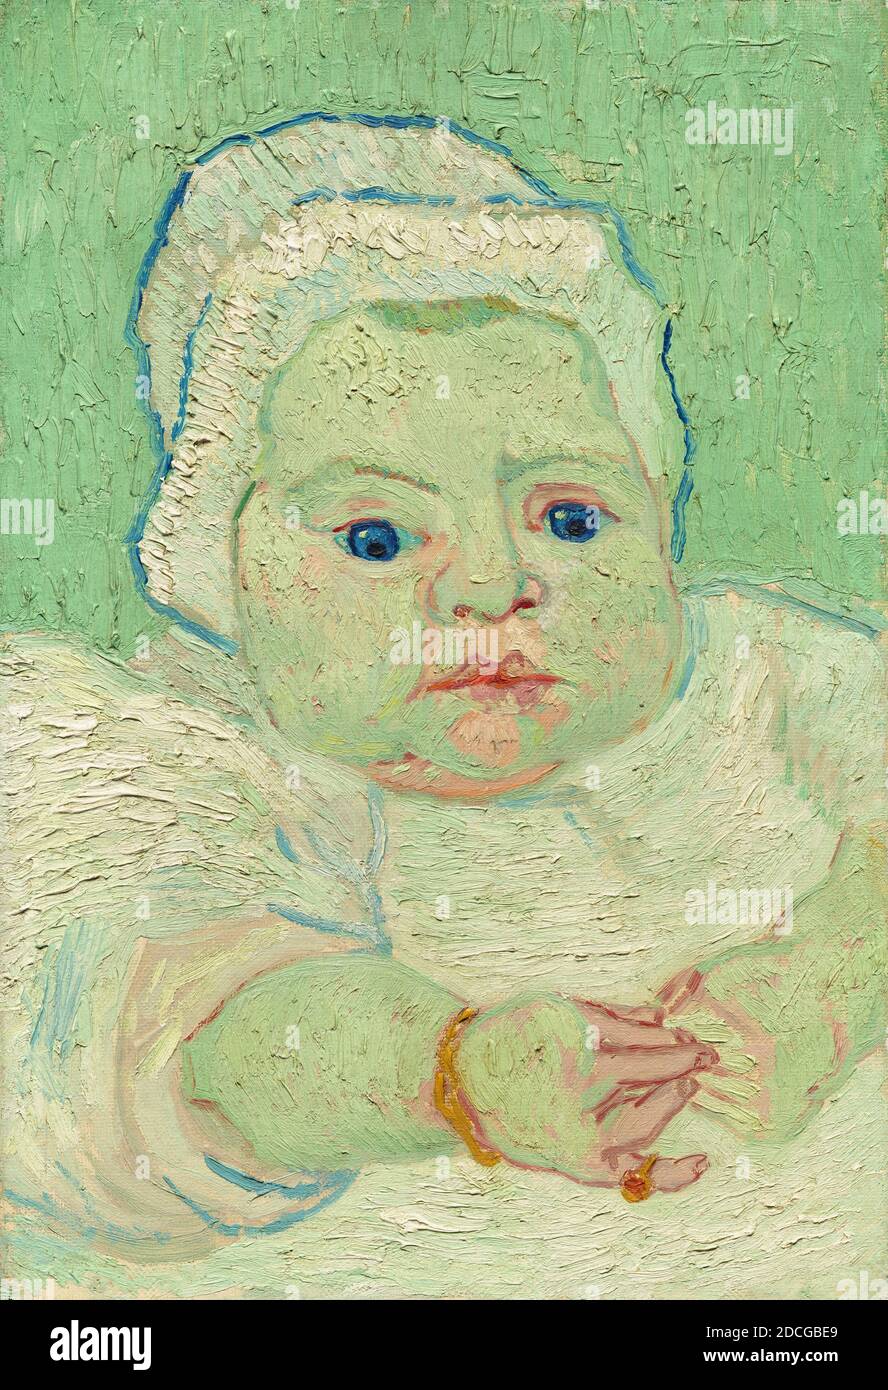 Vincent van Gogh, (artist), Dutch, 1853 - 1890, Roulin's Baby, 1888, oil on canvas, overall: 35 x 23.9 cm (13 3/4 x 9 7/16 in.), framed: 53.9 x 42.5 cm (21 1/4 x 16 3/4 in Stock Photo